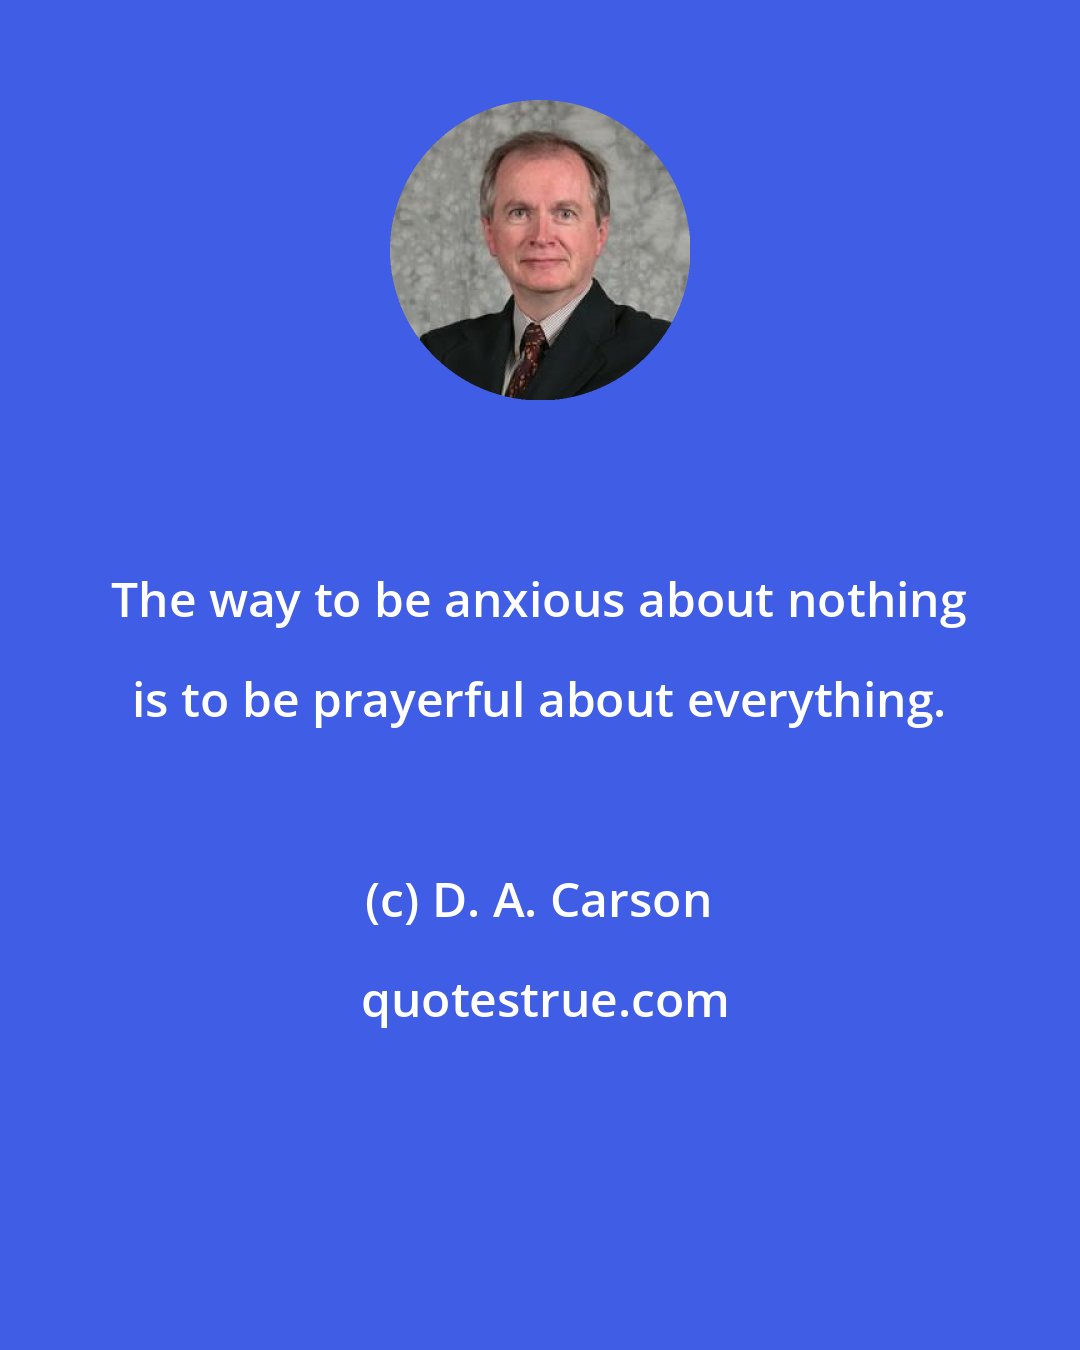 D. A. Carson: The way to be anxious about nothing is to be prayerful about everything.